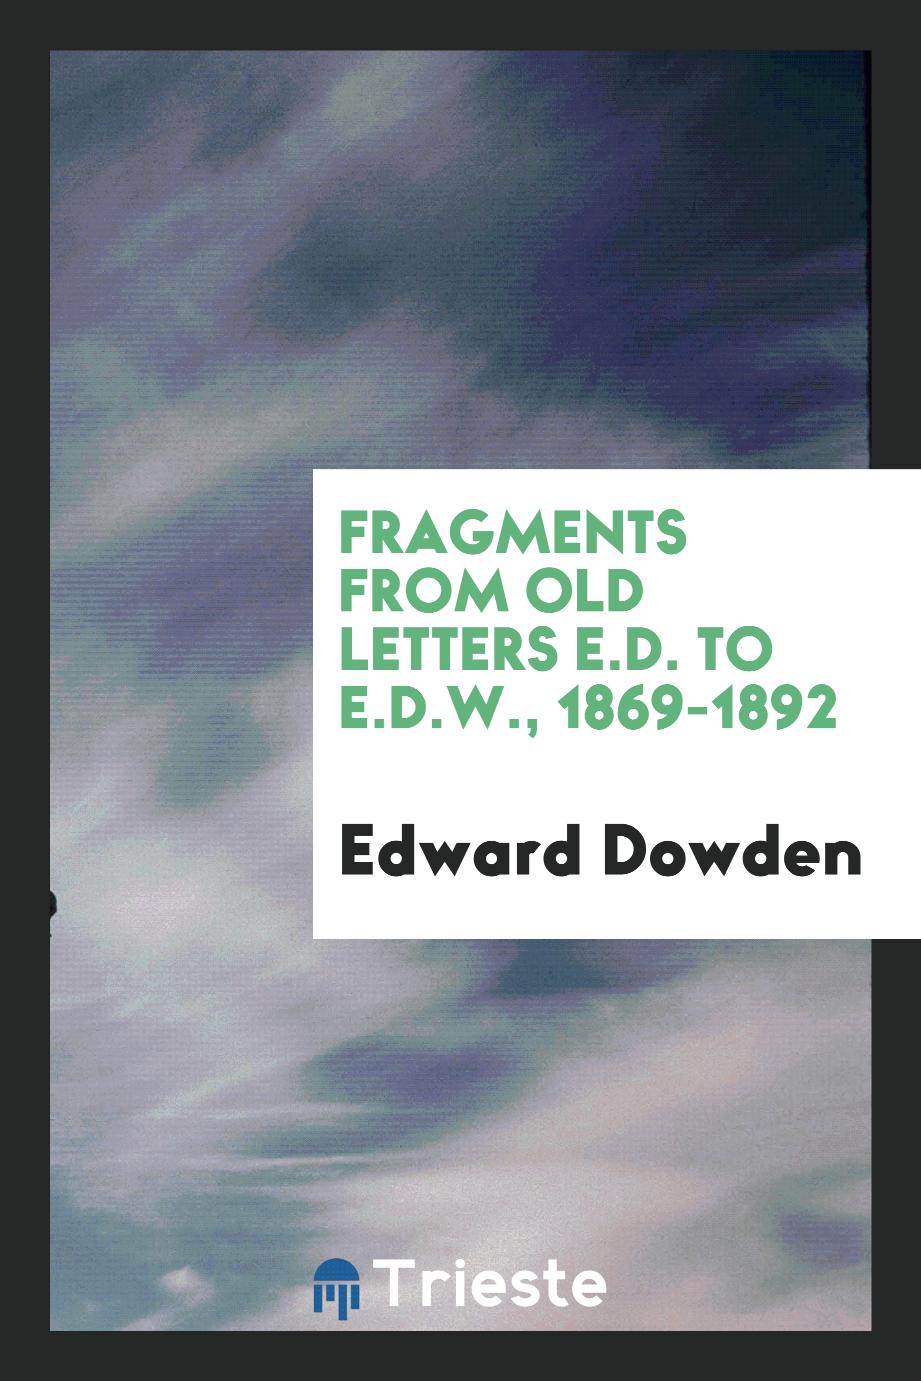 Edward Dowden - Fragments from old letters E.D. to E.D.W., 1869-1892